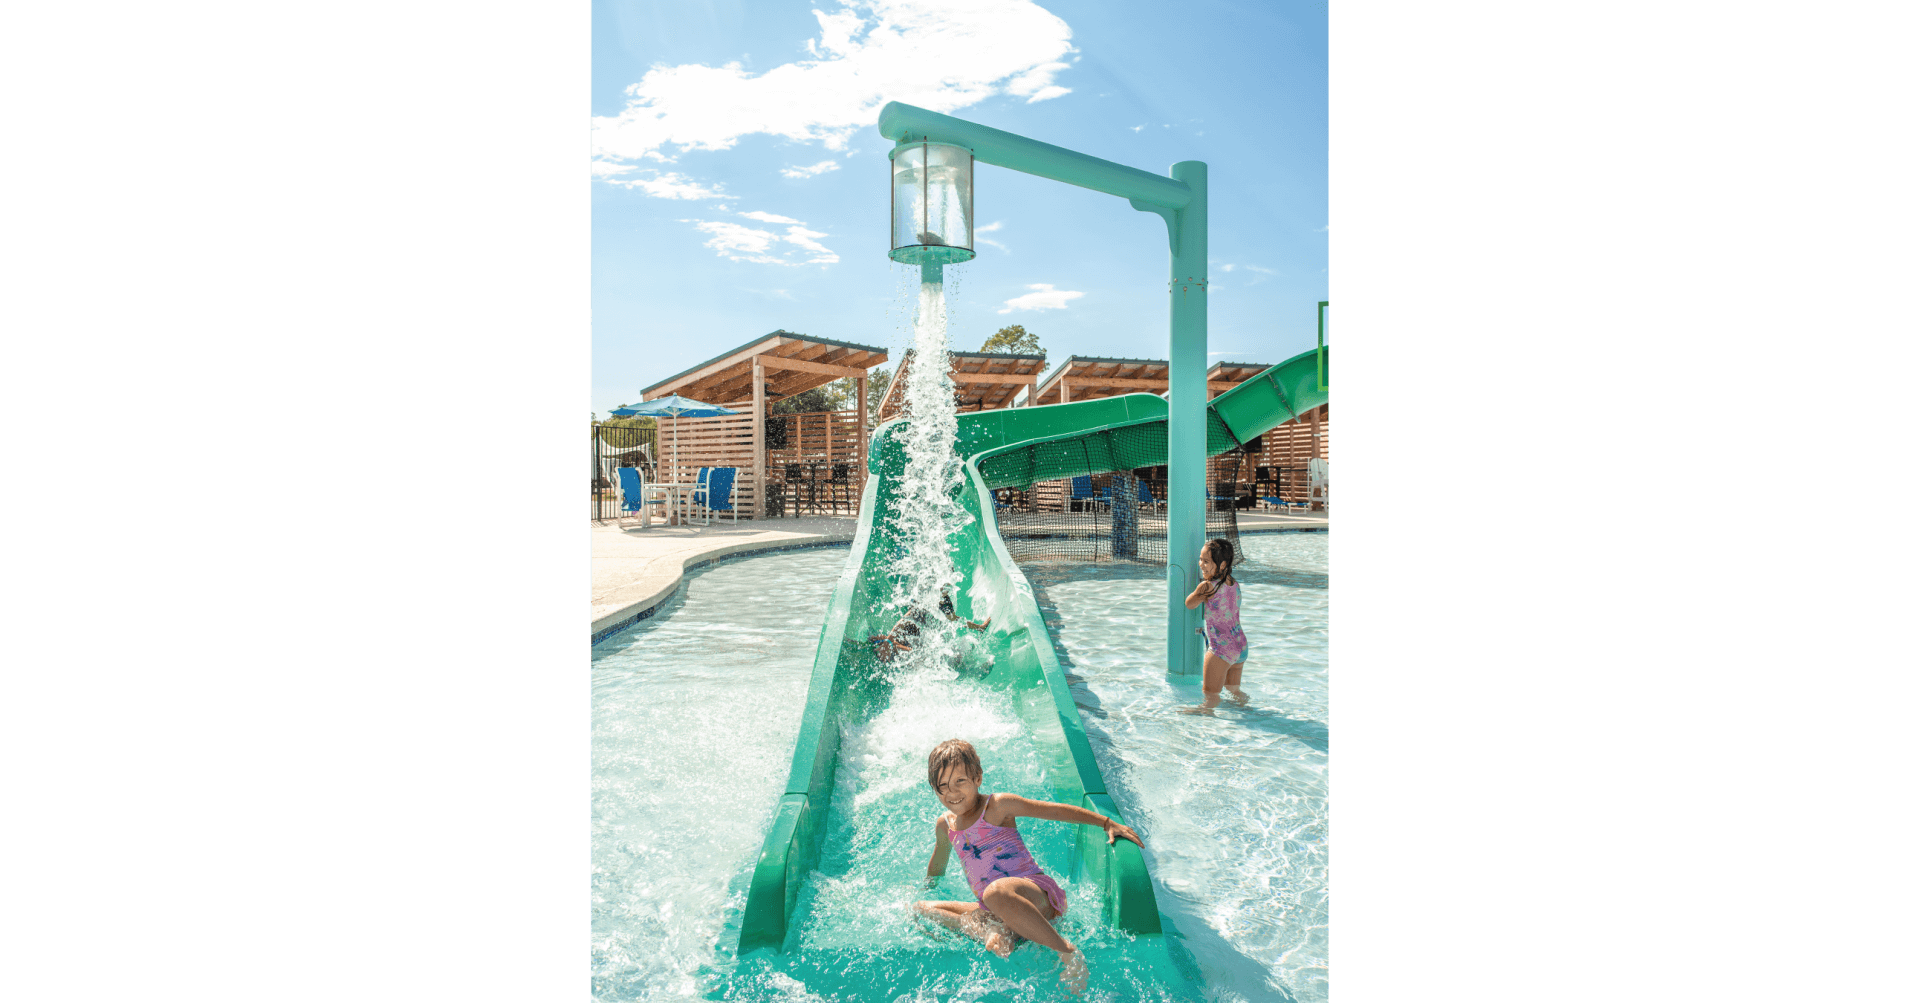 Kid activates the pour over water feature releasing water on another patron coming down the water slide at the Jellystone in Waller, Texas.